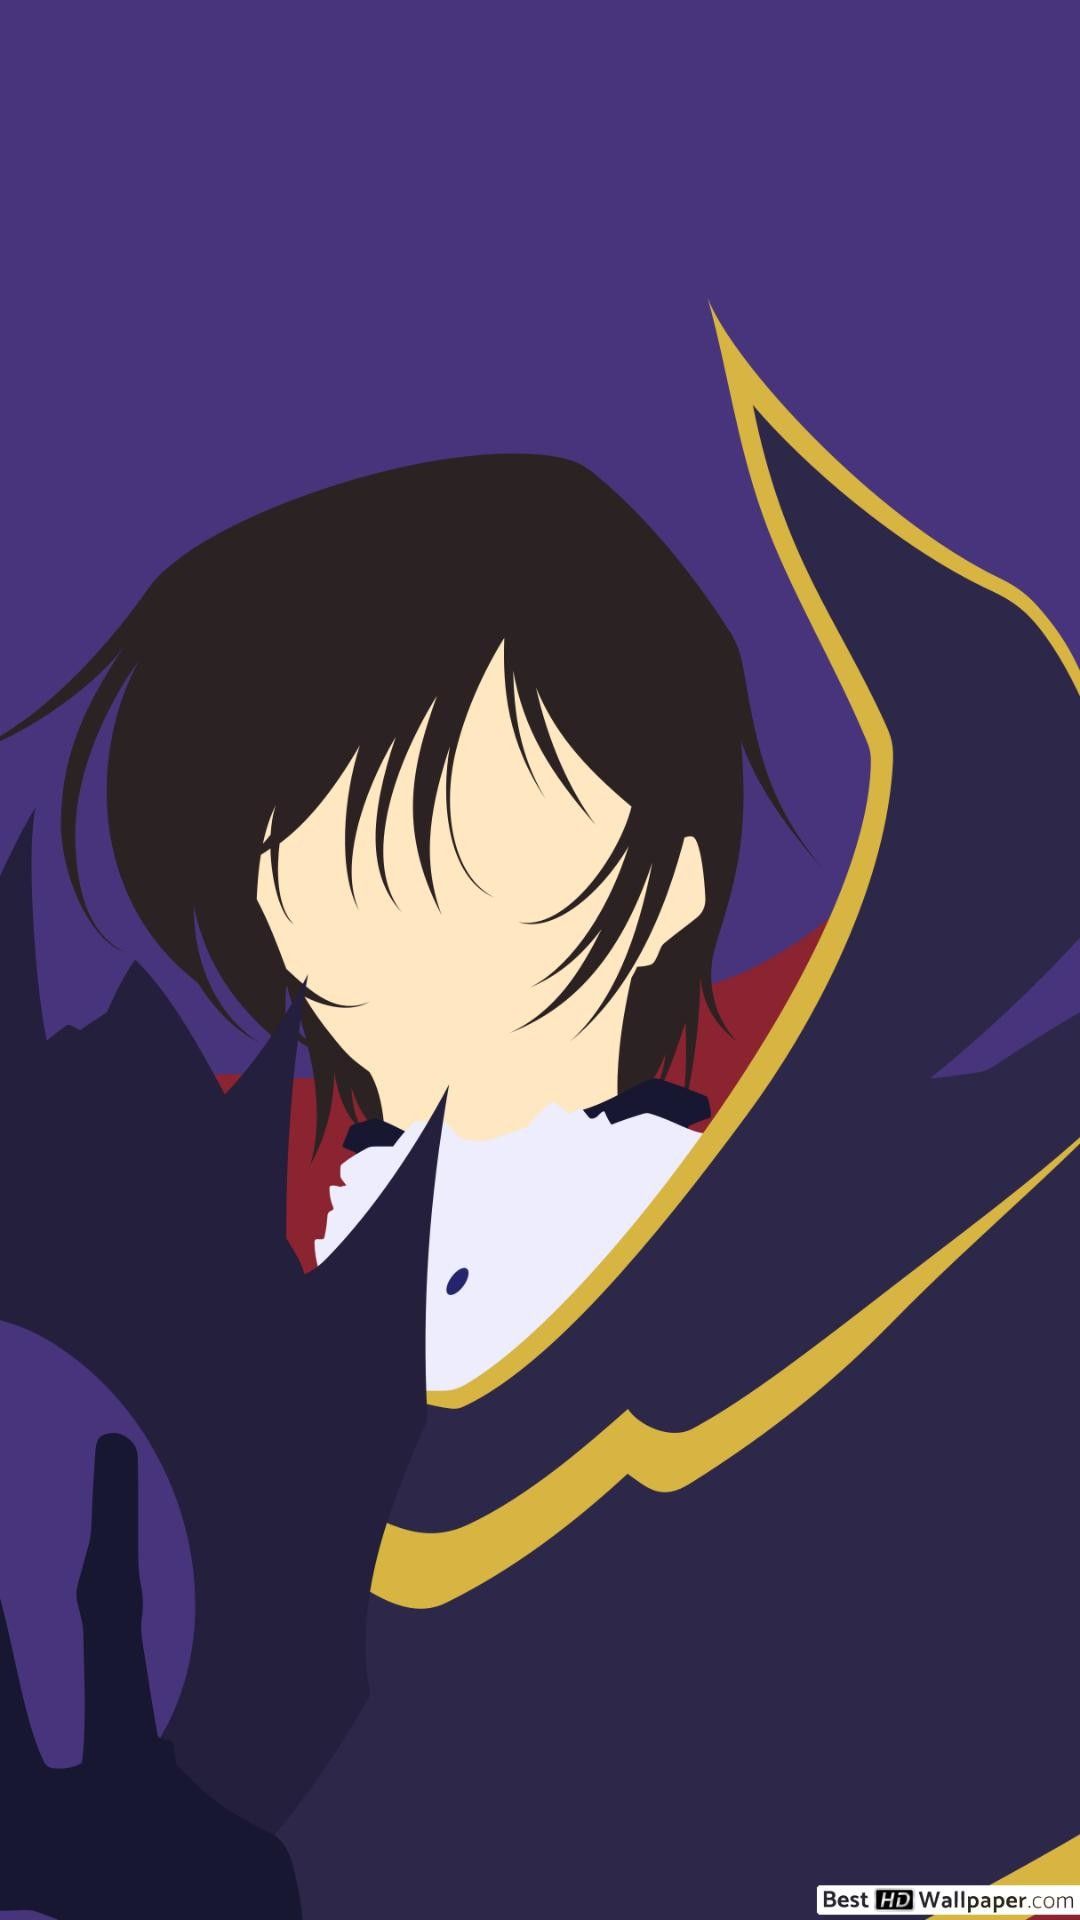 I made a quick wallpaper for my phone after i finished the anime  1080x1920  rCodeGeass